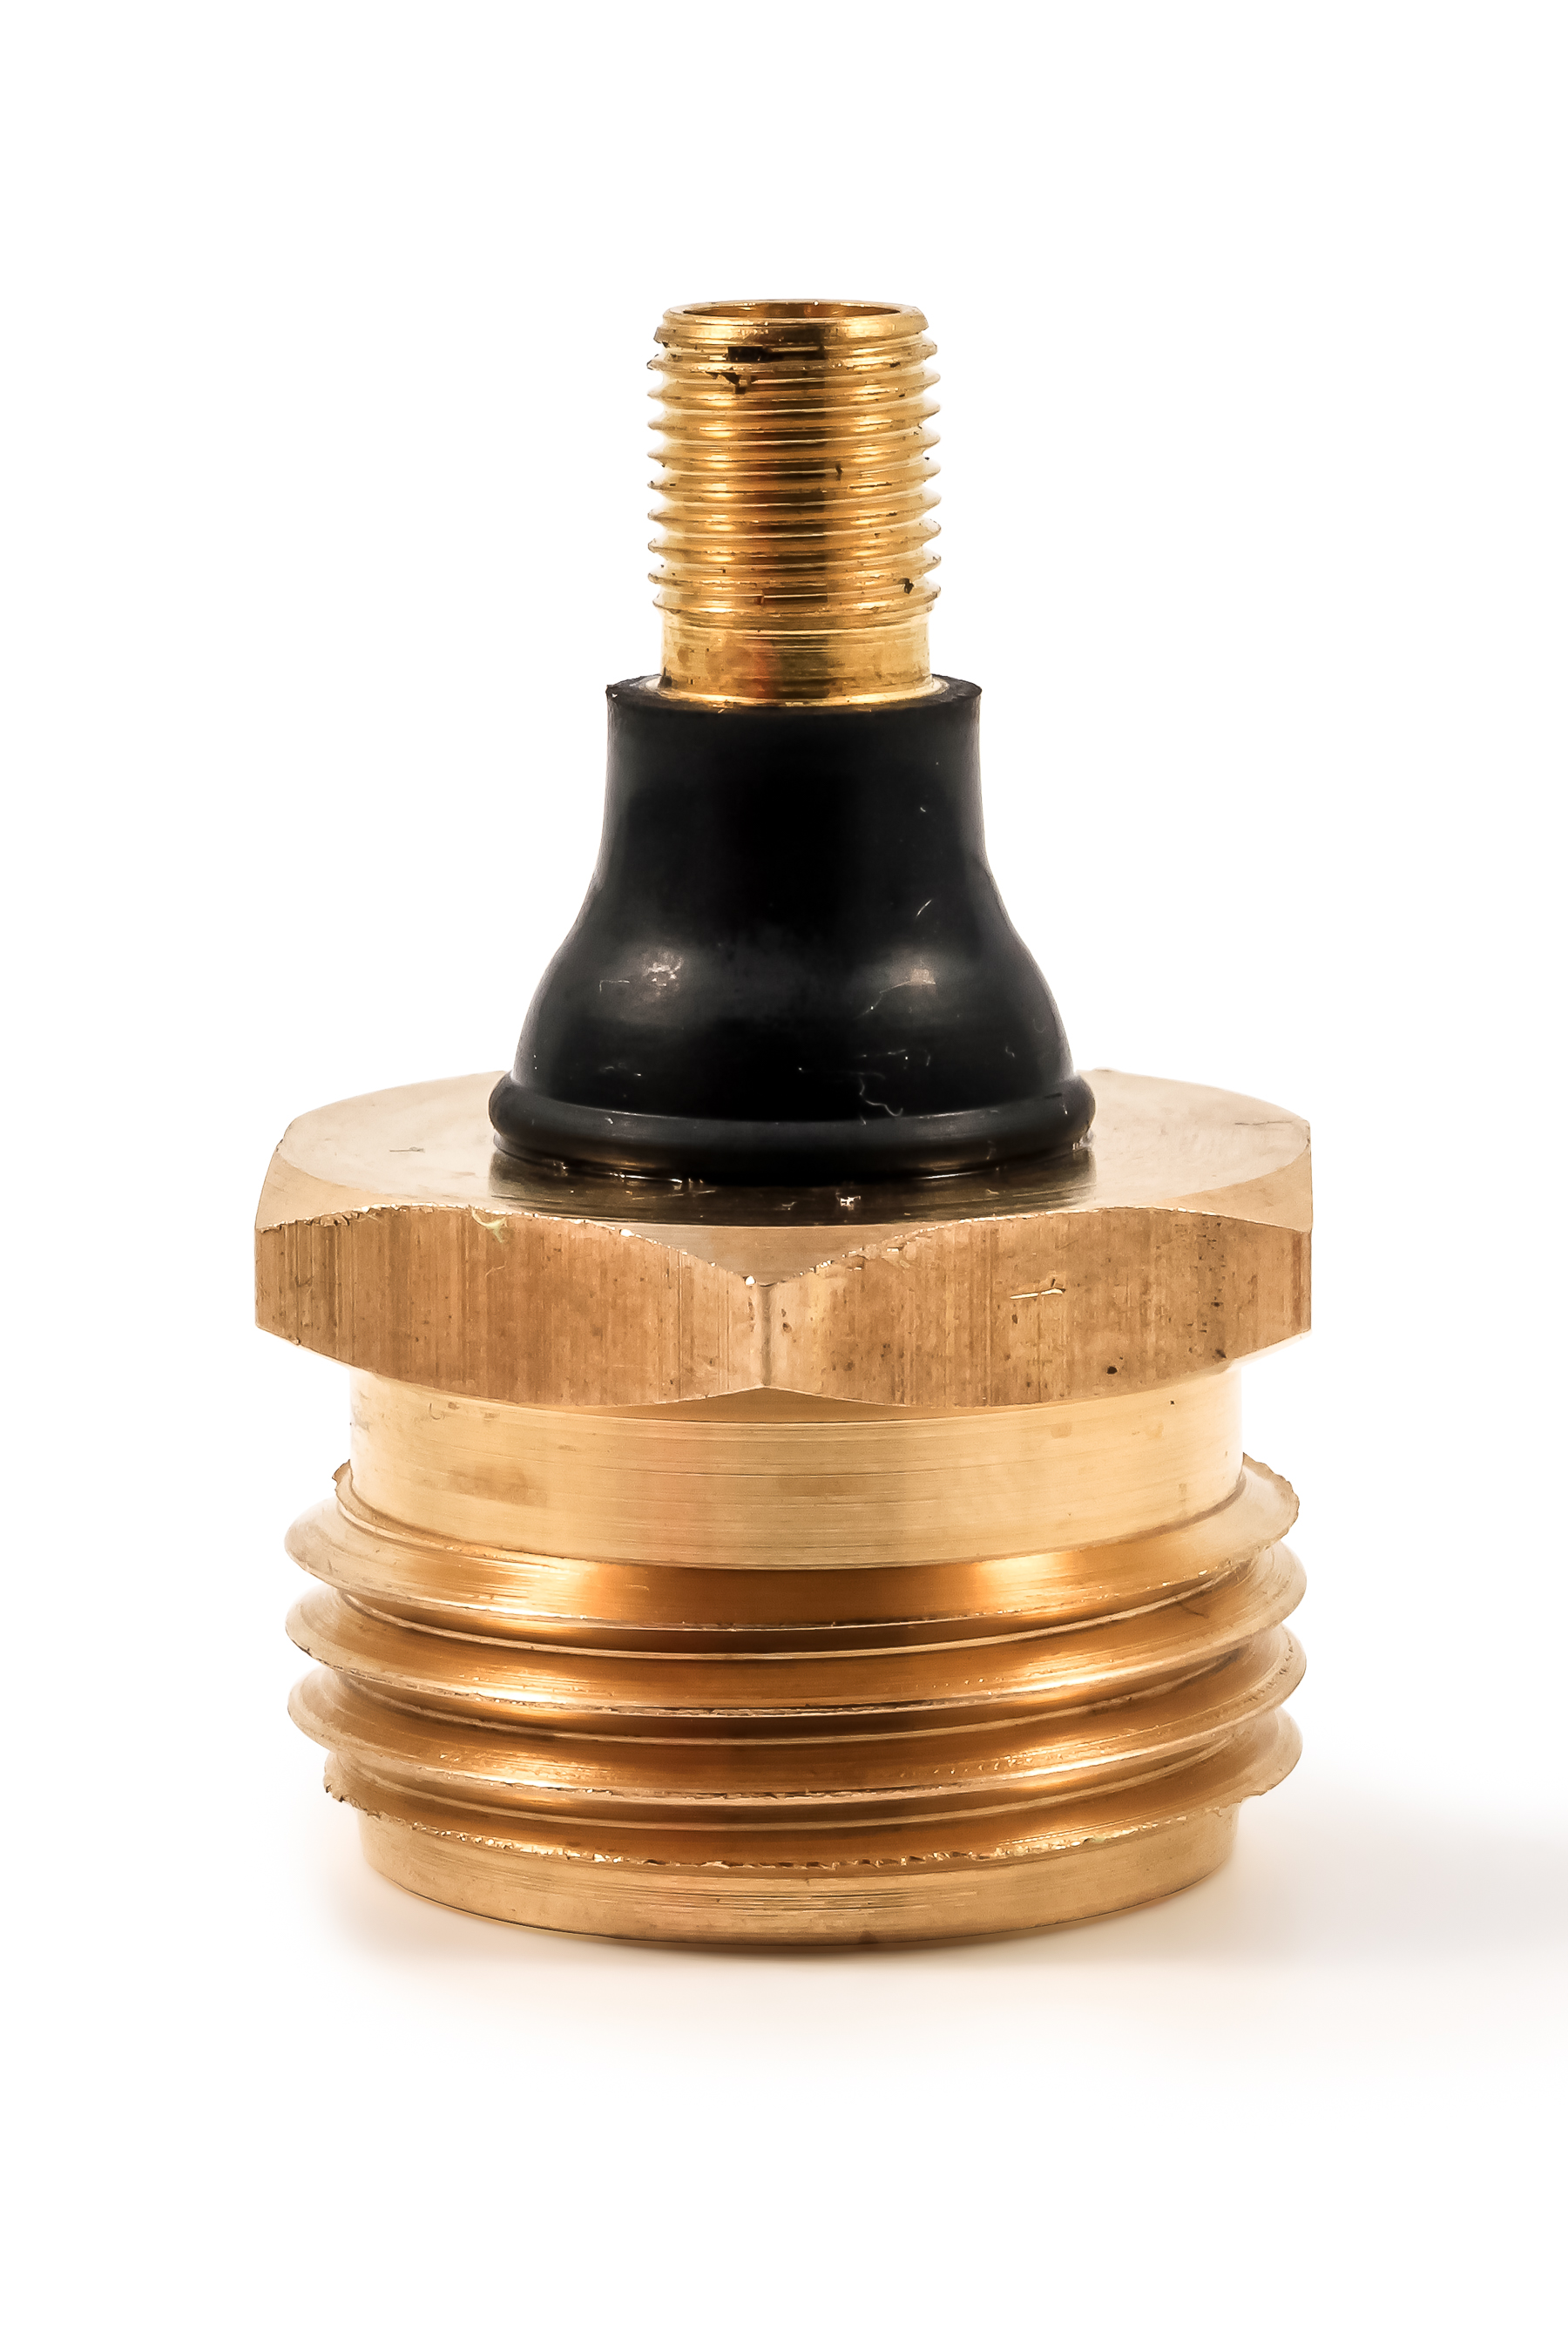 Camco 36153 Brass Blow Out Plug for RV Winterizing - image 5 of 9